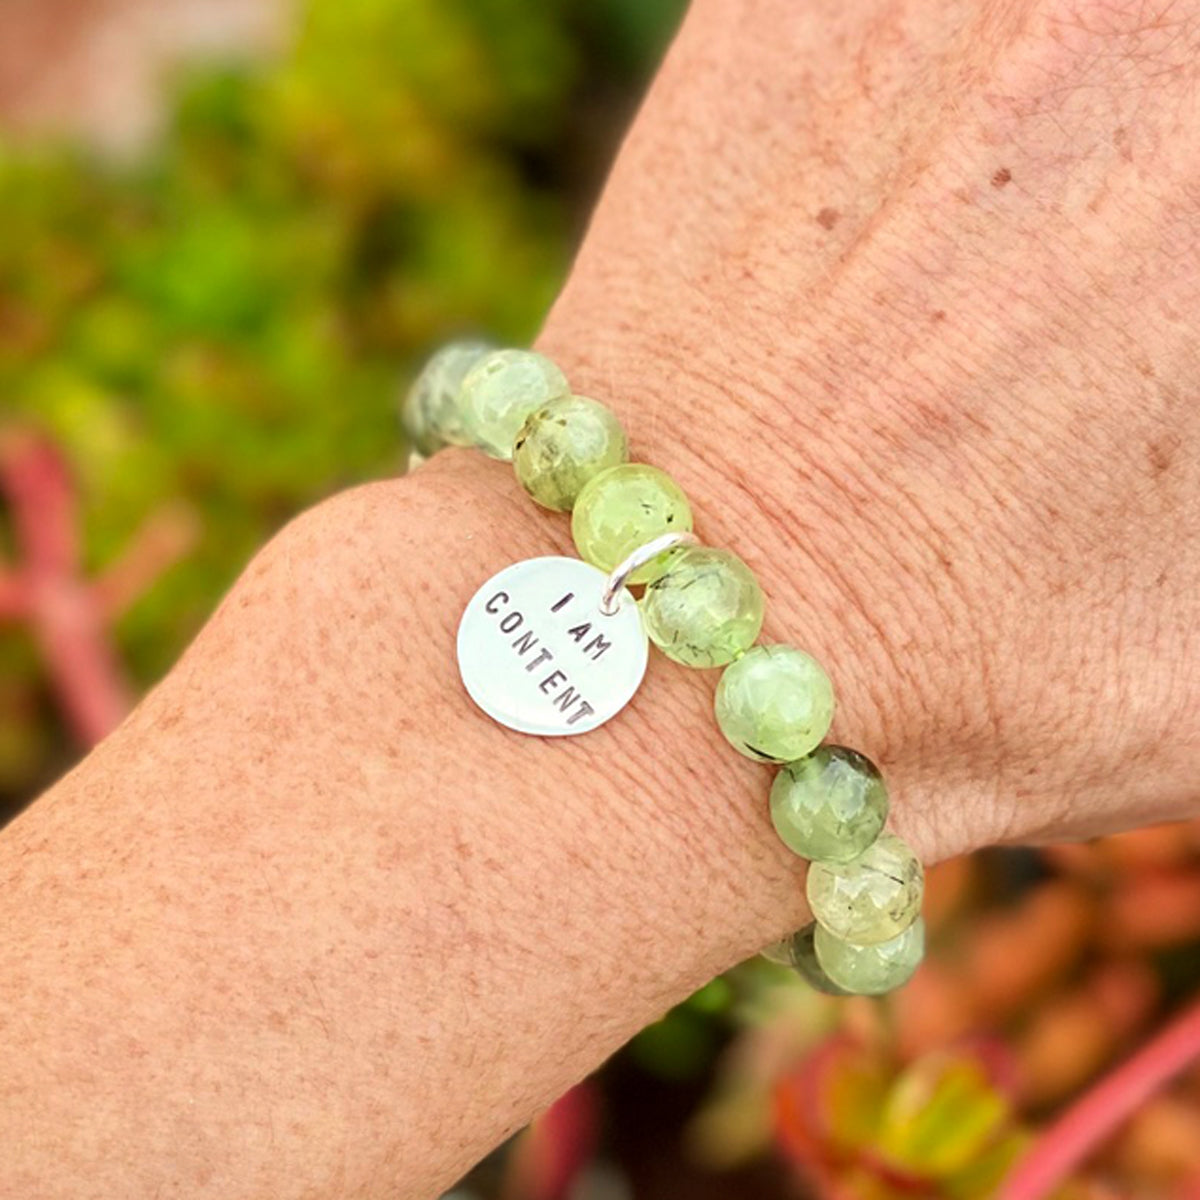 I am Content Affirmation Bracelet with Prehnite to Help Feel Happy & See the Good in All Things